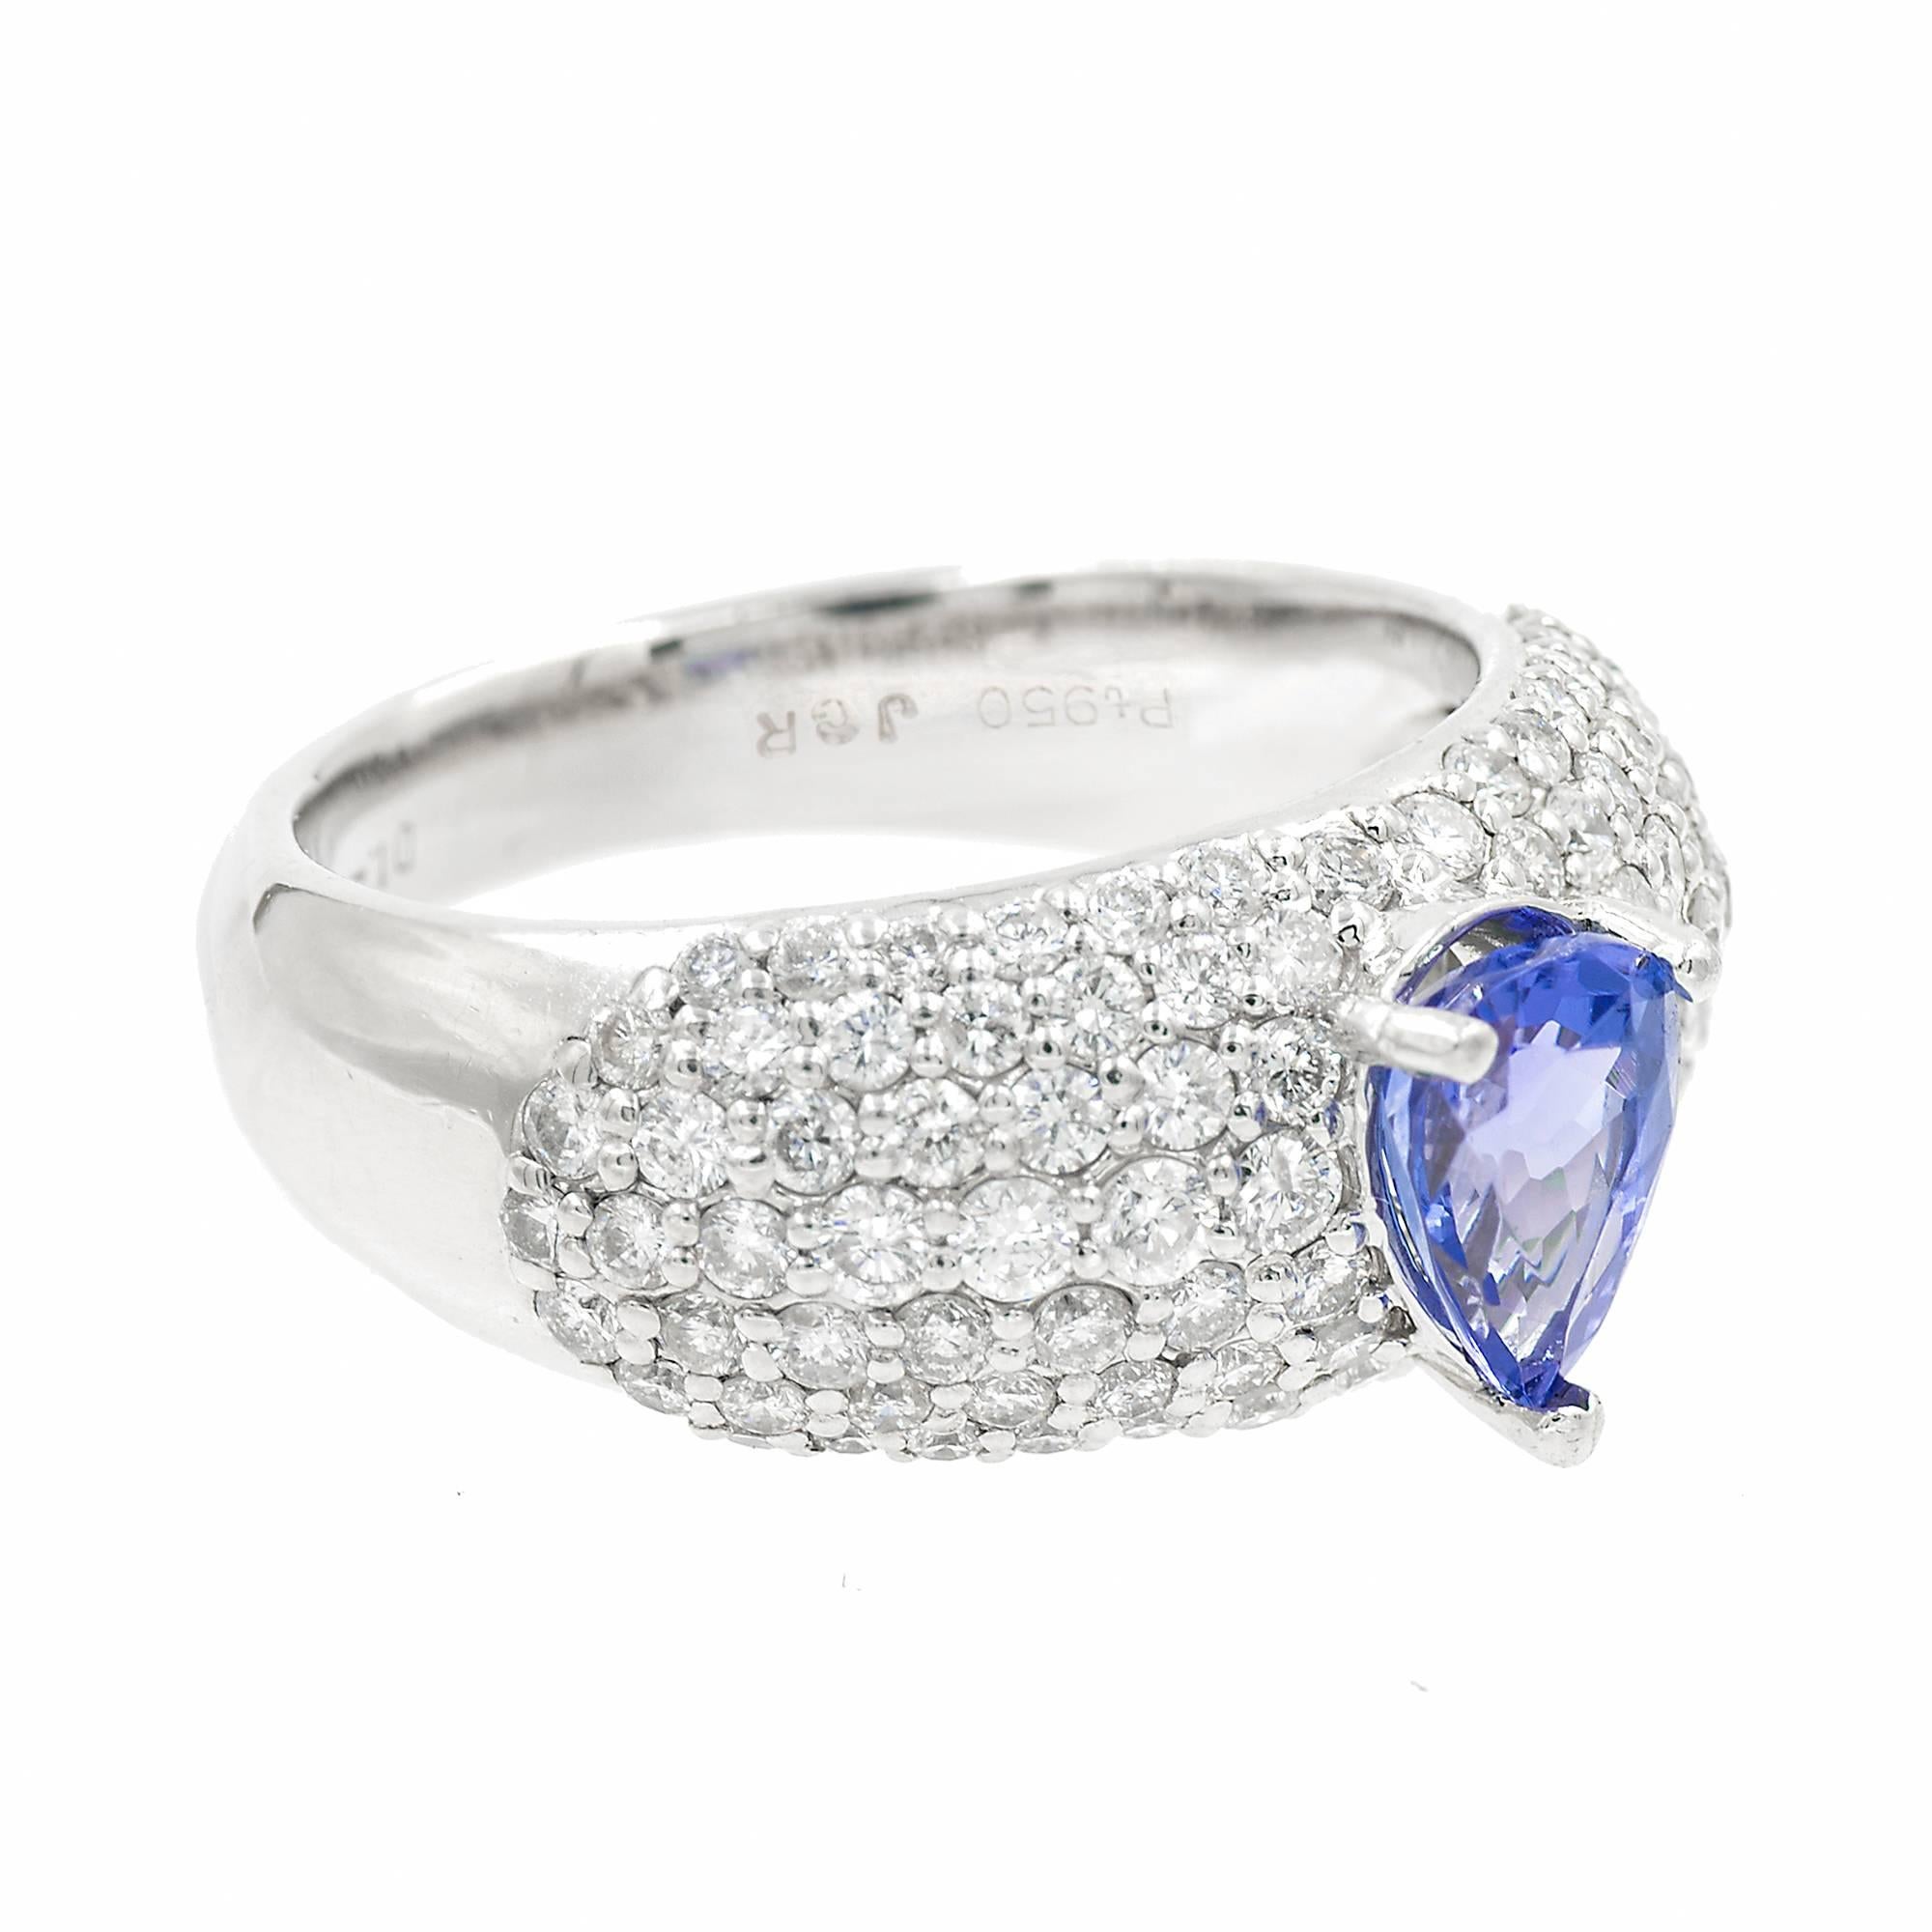 Pear shaped Blue tanzanite cocktail ring with Bead set rows of diamonds in a platinum setting. 

1 pear shape Tanzanite approx. total weight .75cts
98 round diamonds approx. total weight 1.20cts, G, VS2-SI1
Size 6 and sizable
Platinum
Stamped: 950